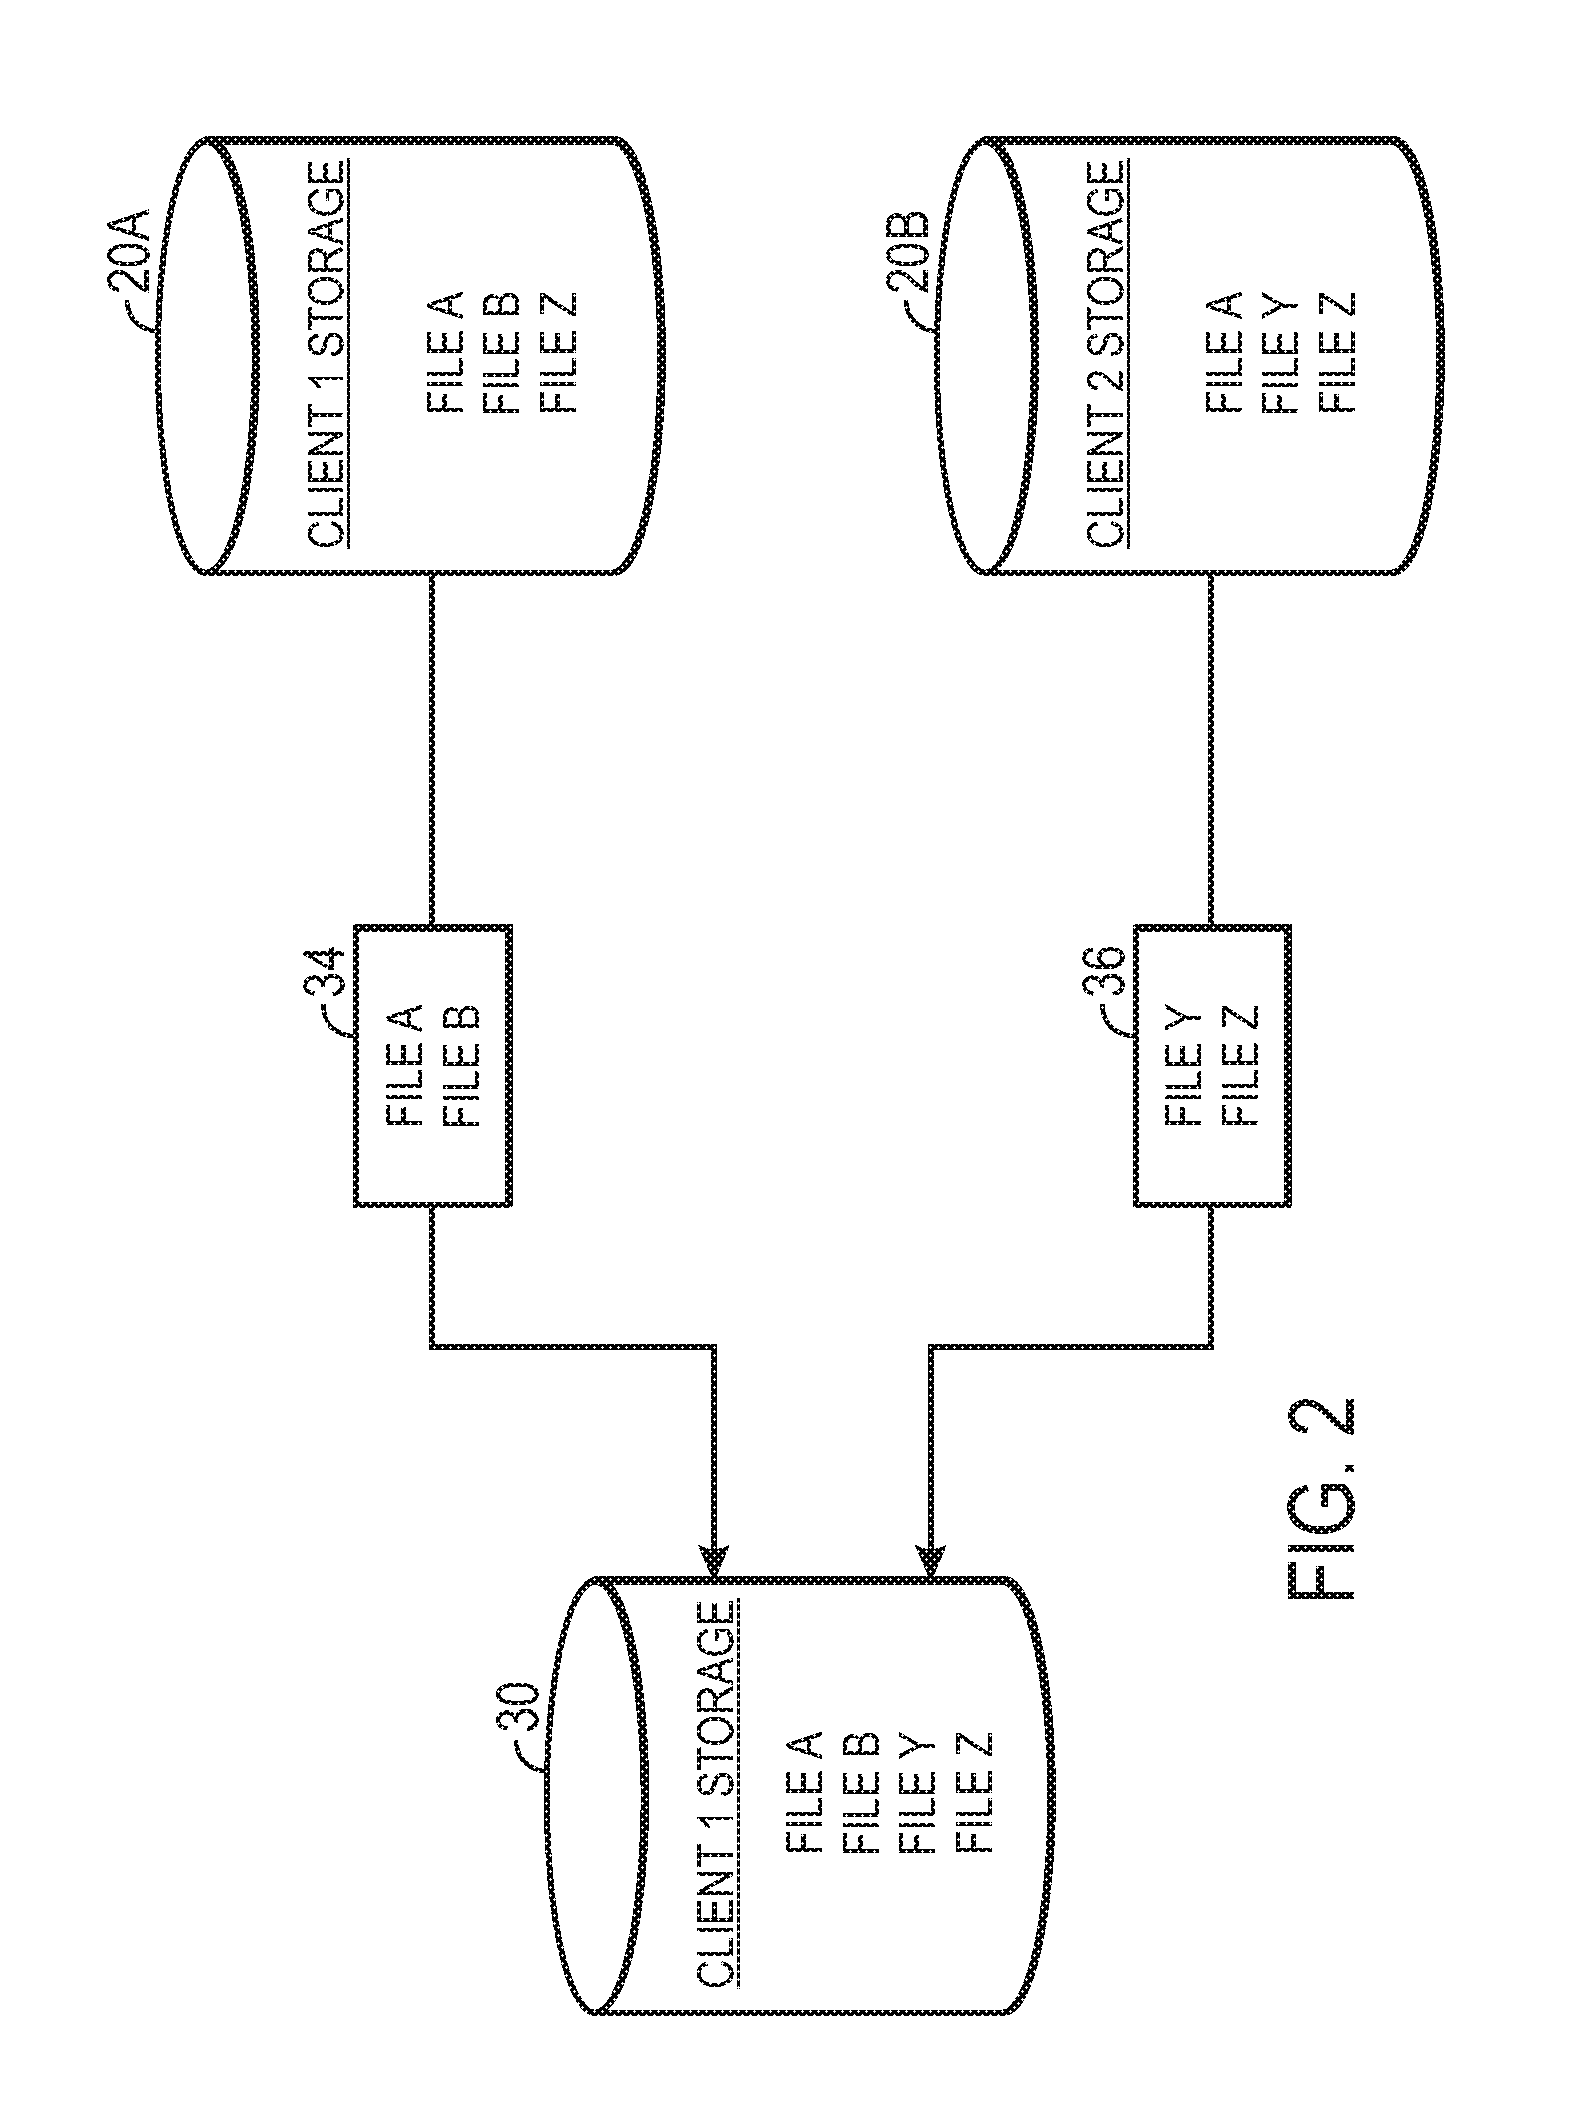 Http-based client-server communication system and method